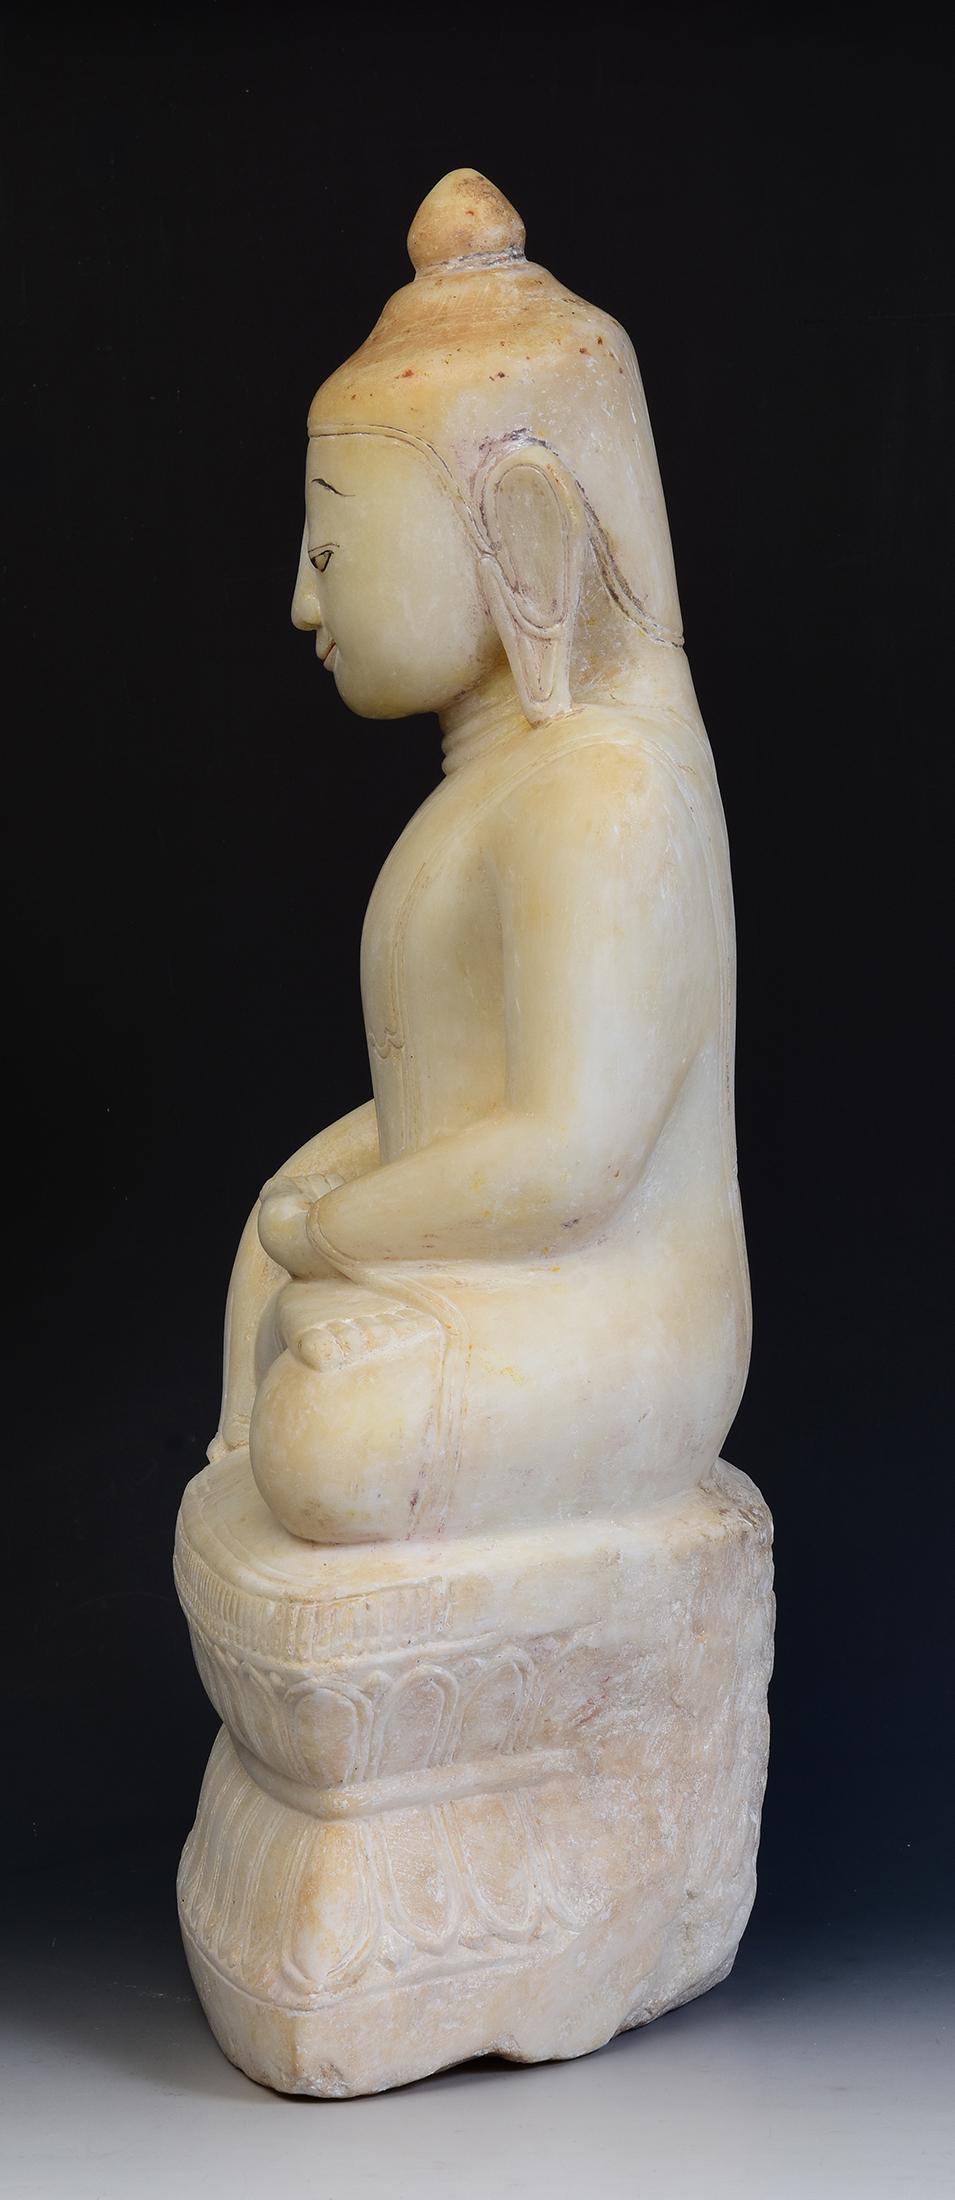 17th - 18th Century, Shan, Antique Burmese Alabaster Marble Seated Buddha Statue 5